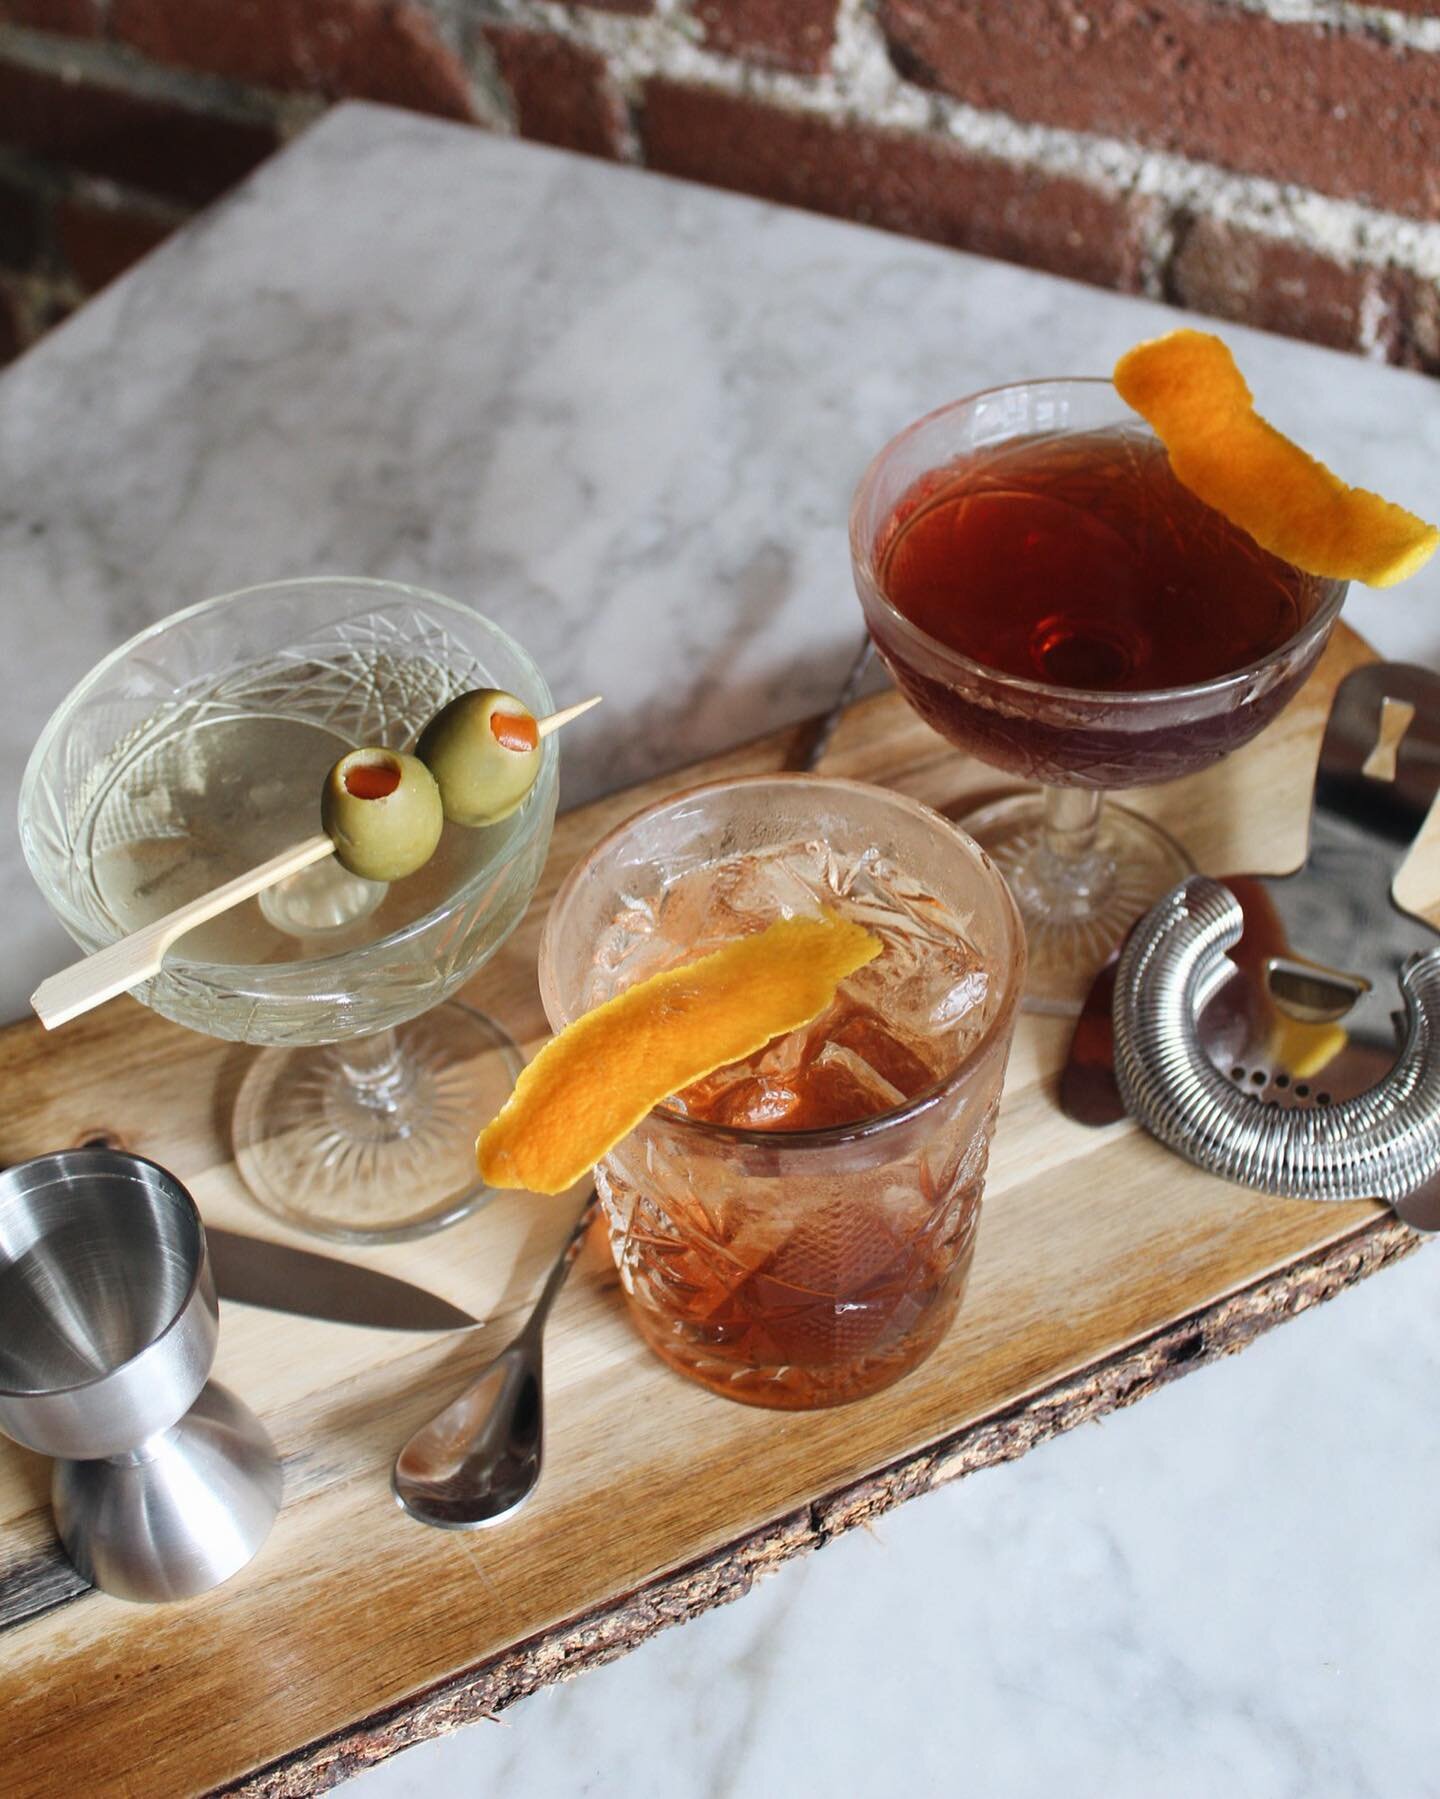 NEW cocktail menu alert 🚨⚠️ 

Featuring Black Manhattans, Mellow Old Fashioneds, and Congressional Pickles, this menu highlights the best of our prohibition vibe! 

Pictured here:
🥒Congressional Pickle, 🥃Mellow Old Fashioned, &amp; 
🍊Martinez

Fu